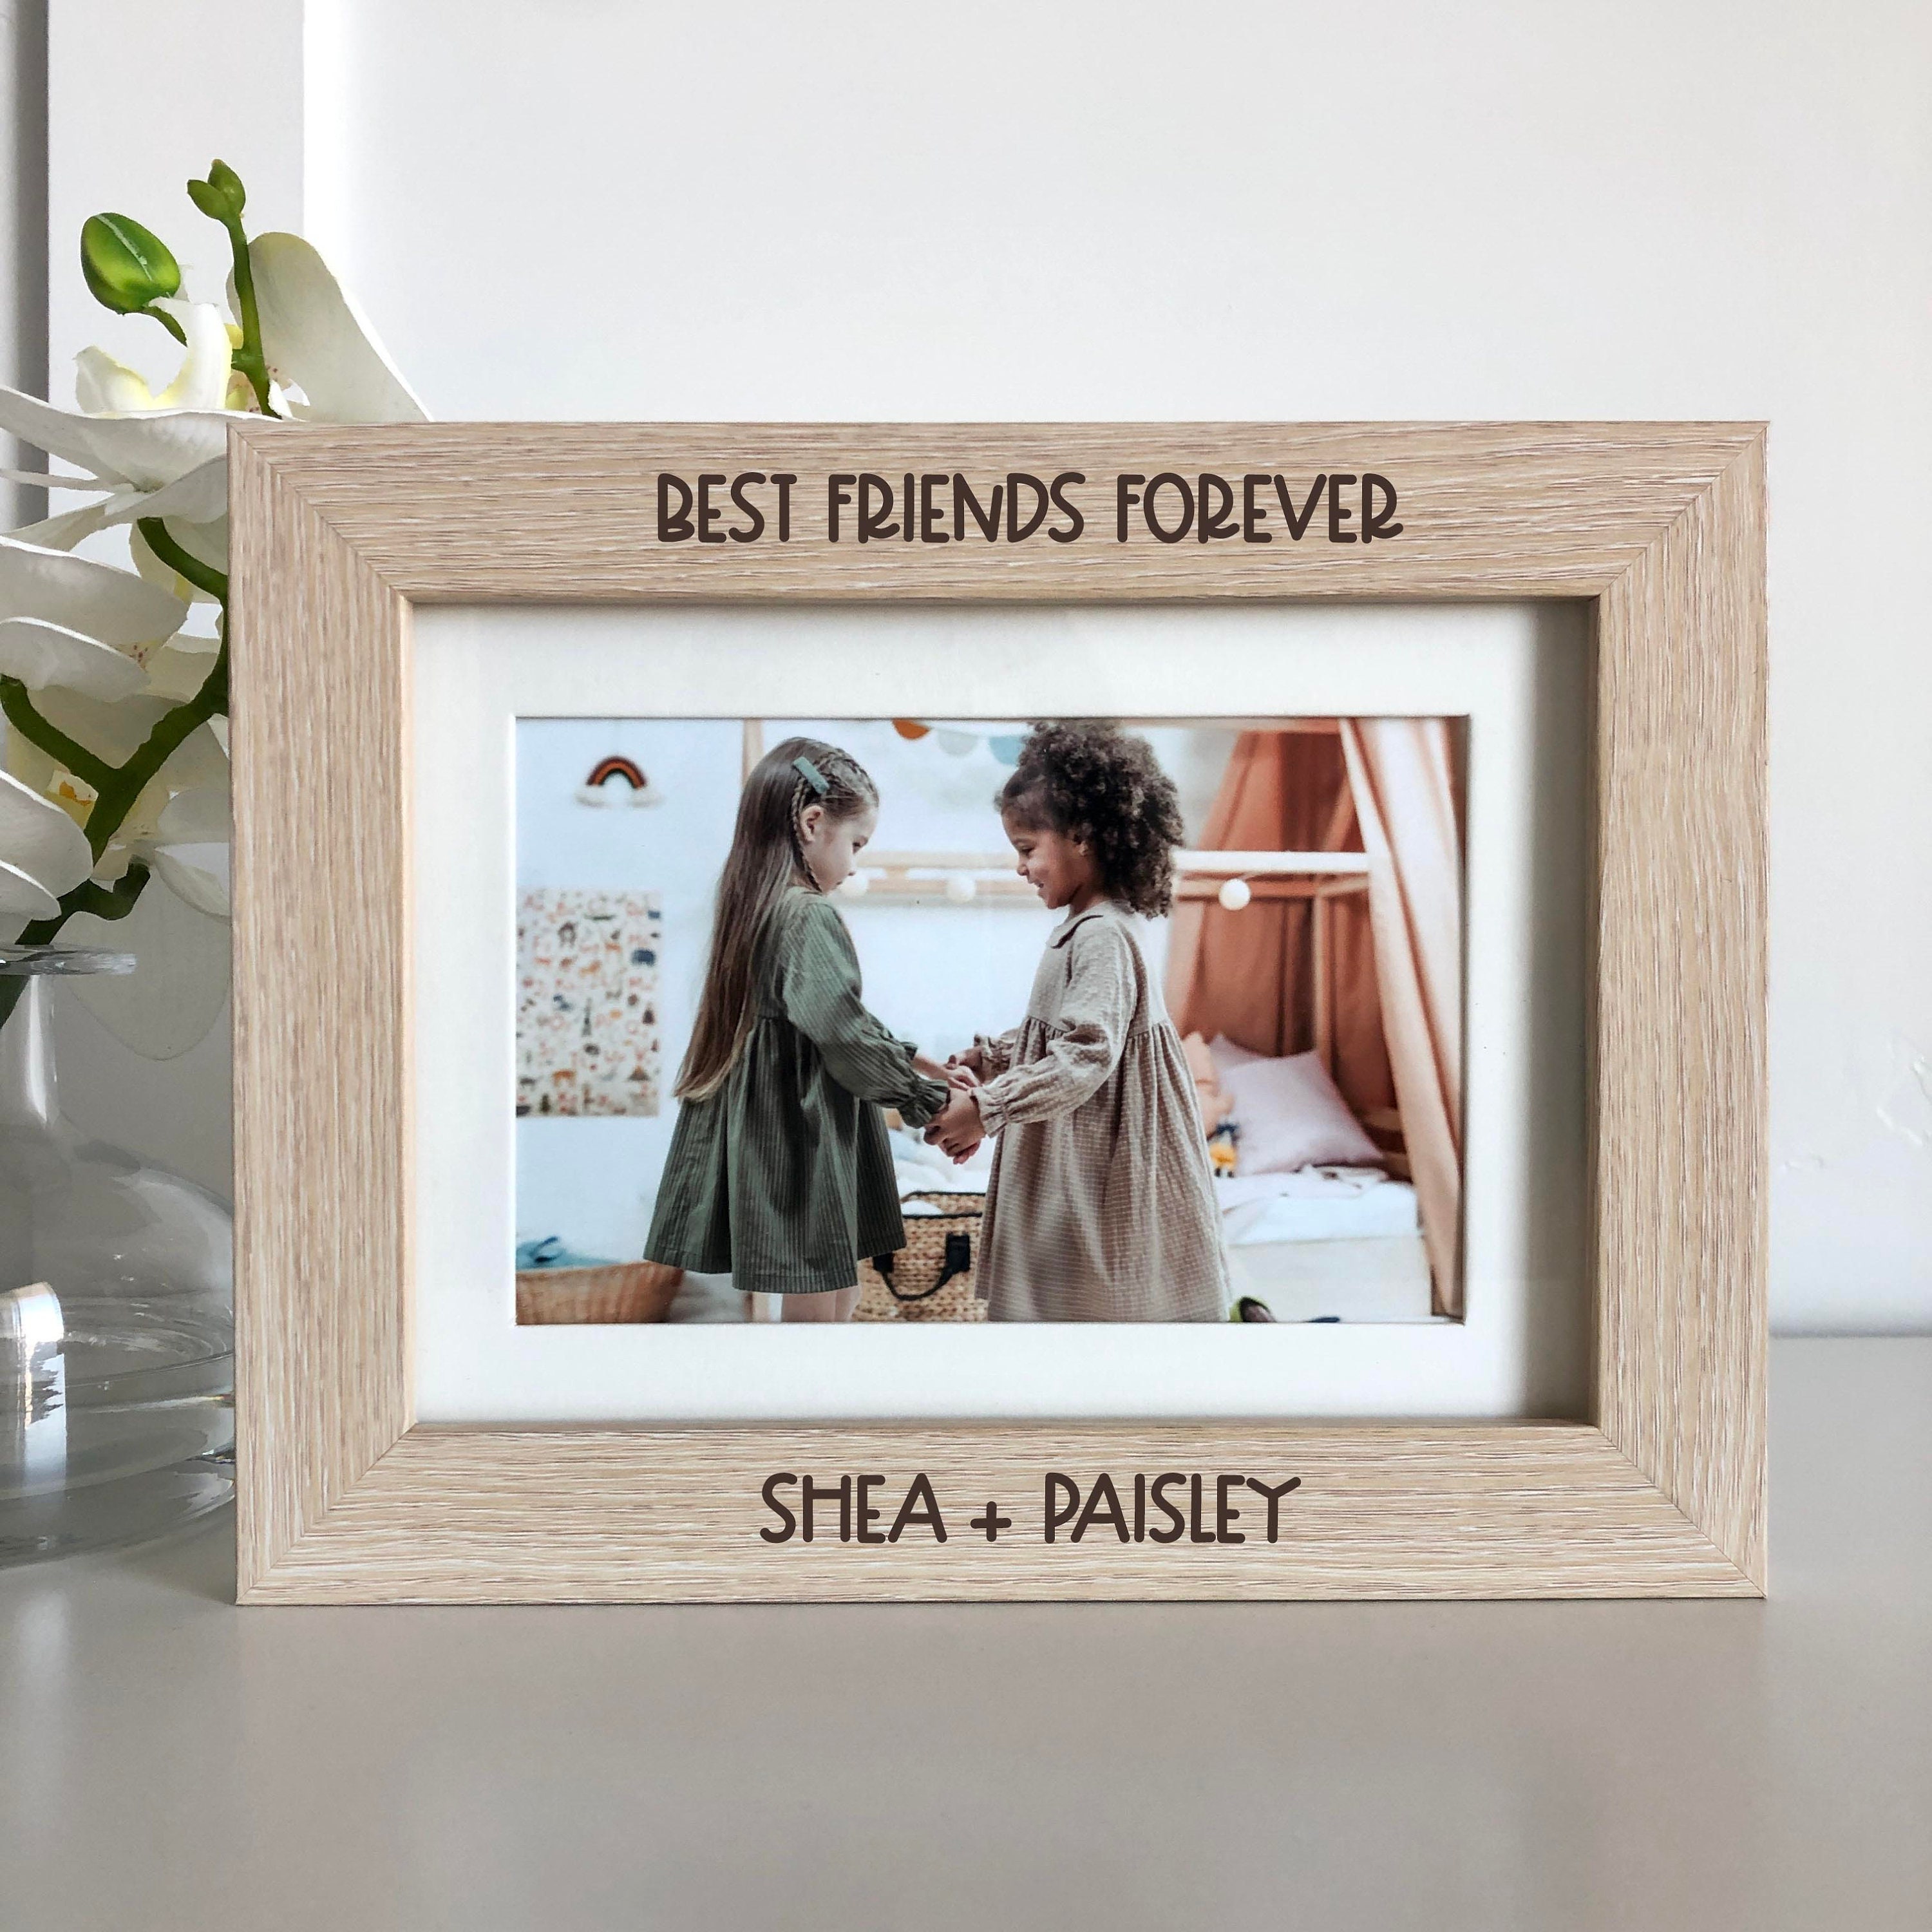 Personalized Friends Photo Frame - Expressions of Friendship